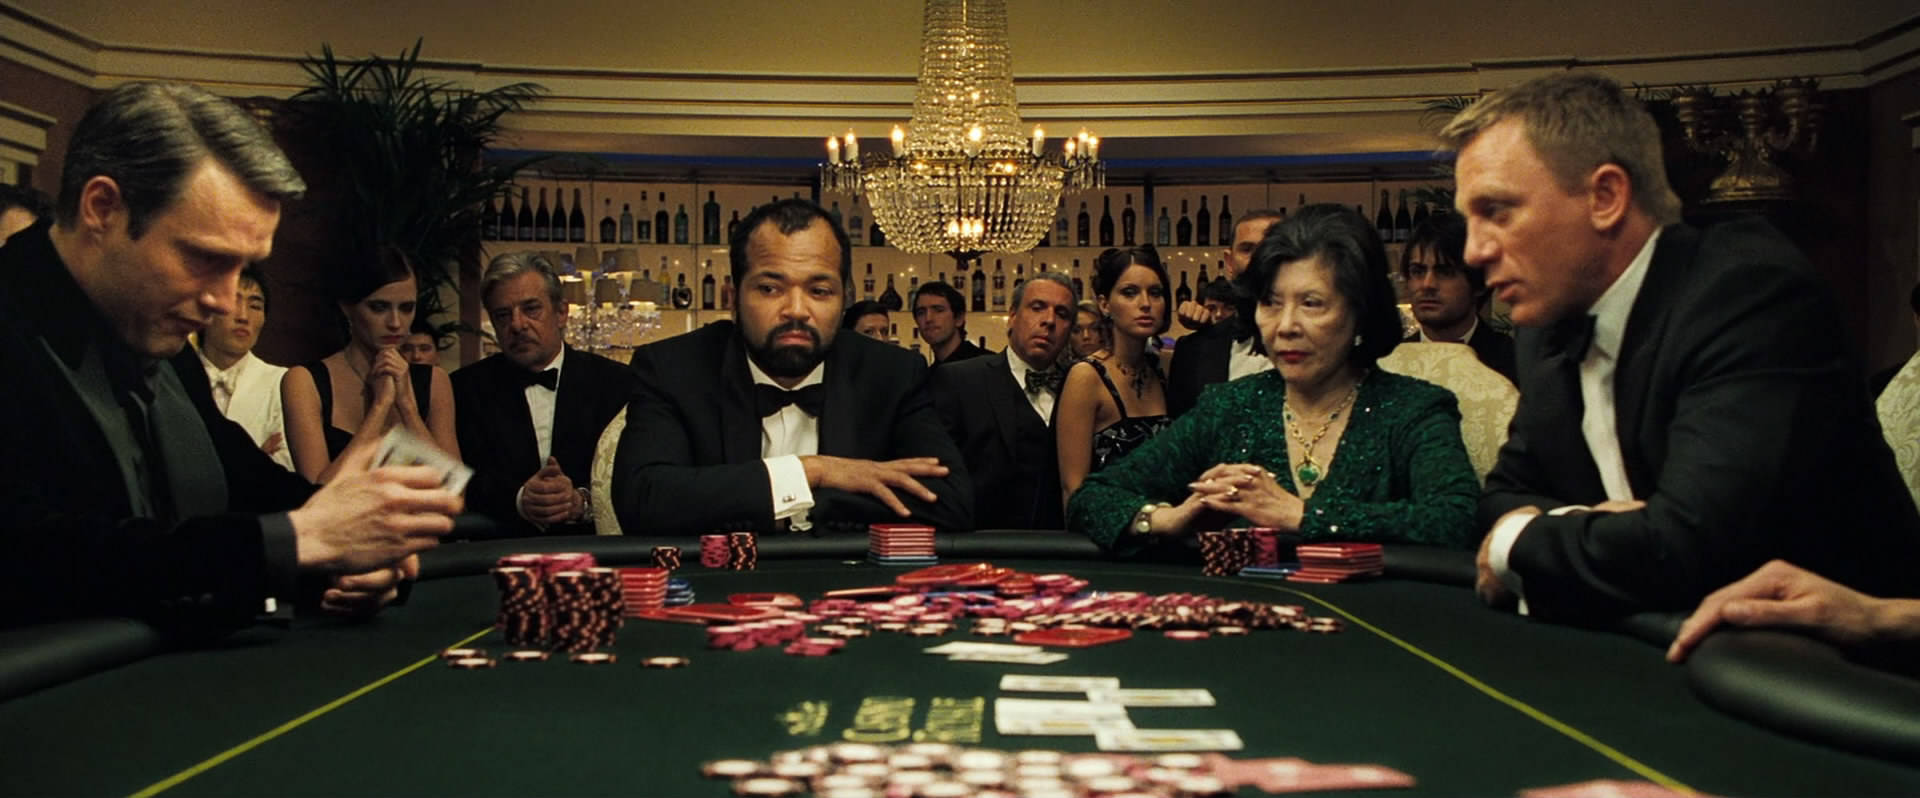 Rich People Playing On Poker Table Background